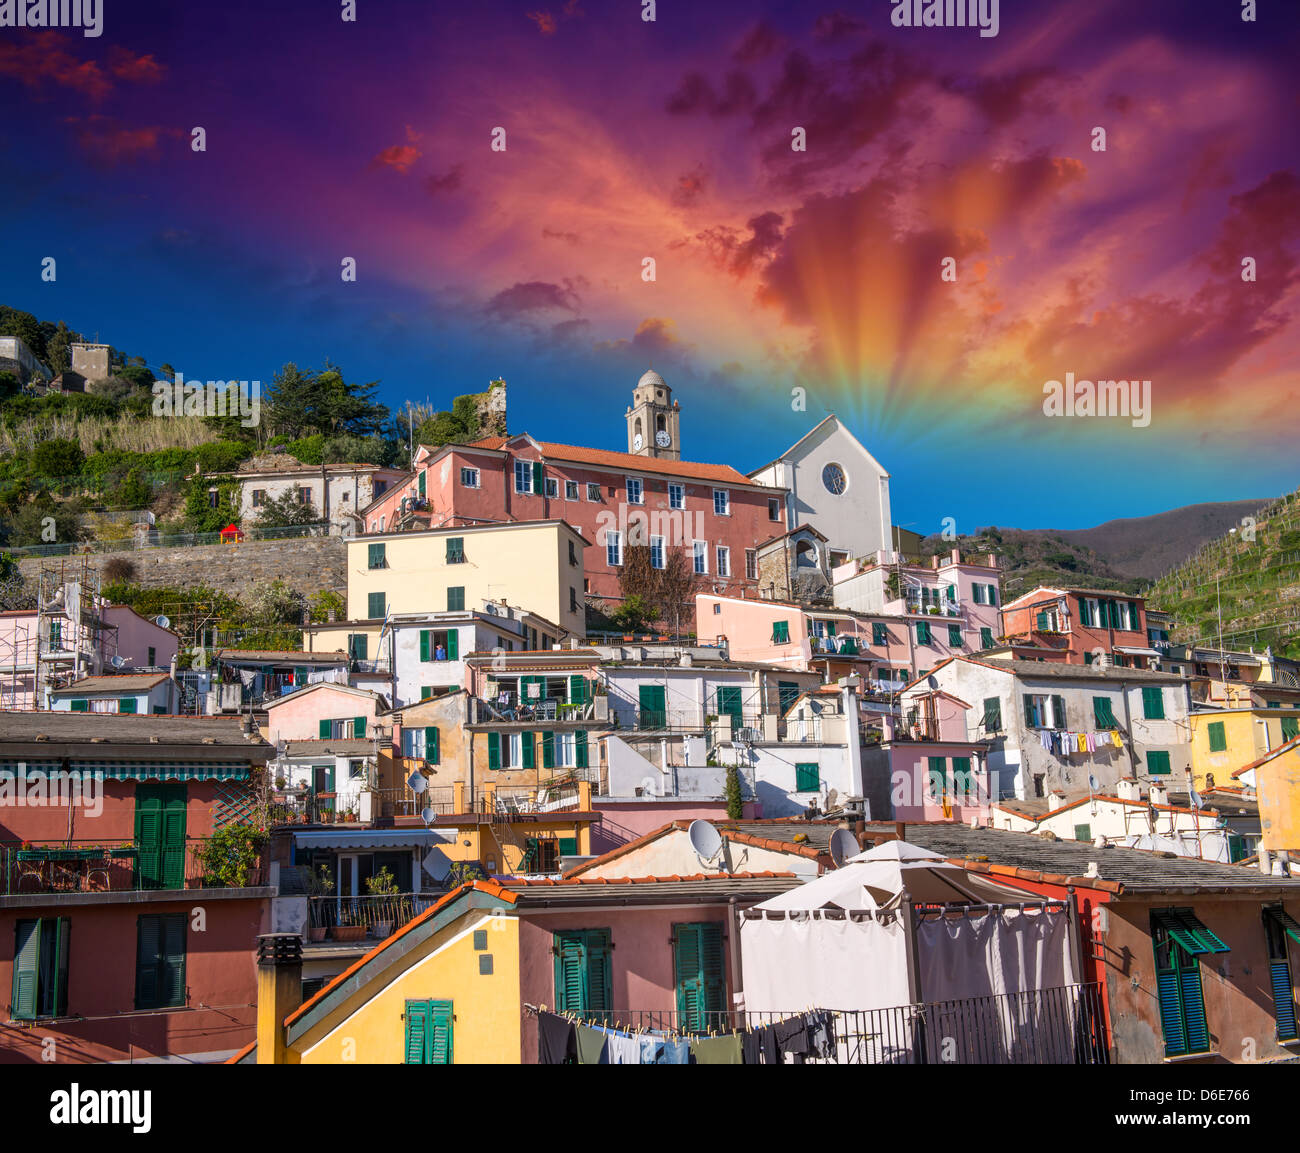 Quaint Village of Vernazza, Cinque Terre. Beautiful colorful homes of Town center. Stock Photo